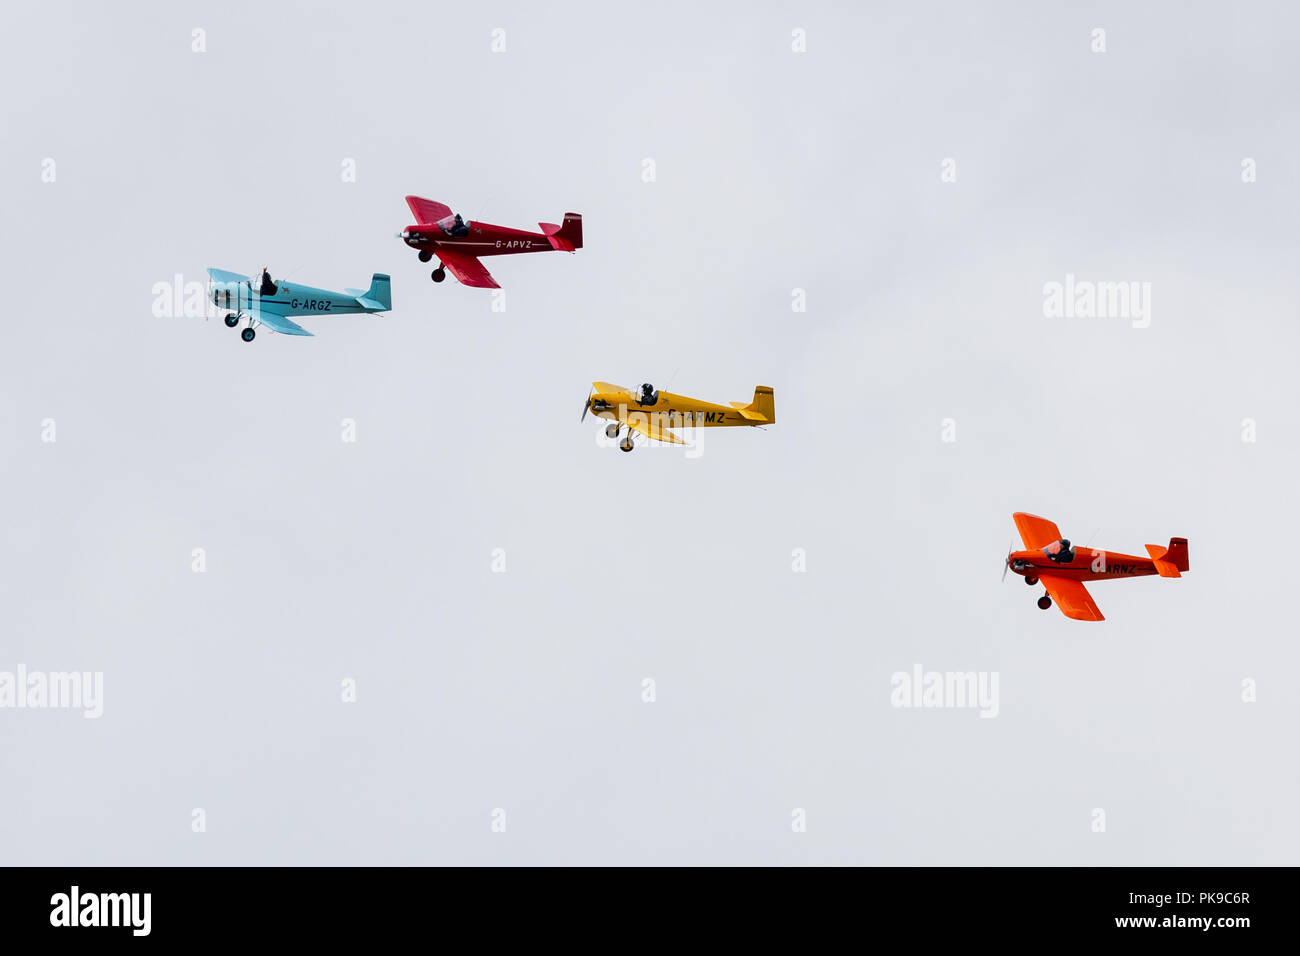 A colourful display of formation flying by the Tiger Club's Turbulent Display Team in their, Roger Druine built, D31 Turbulent single seaters. Stock Photo